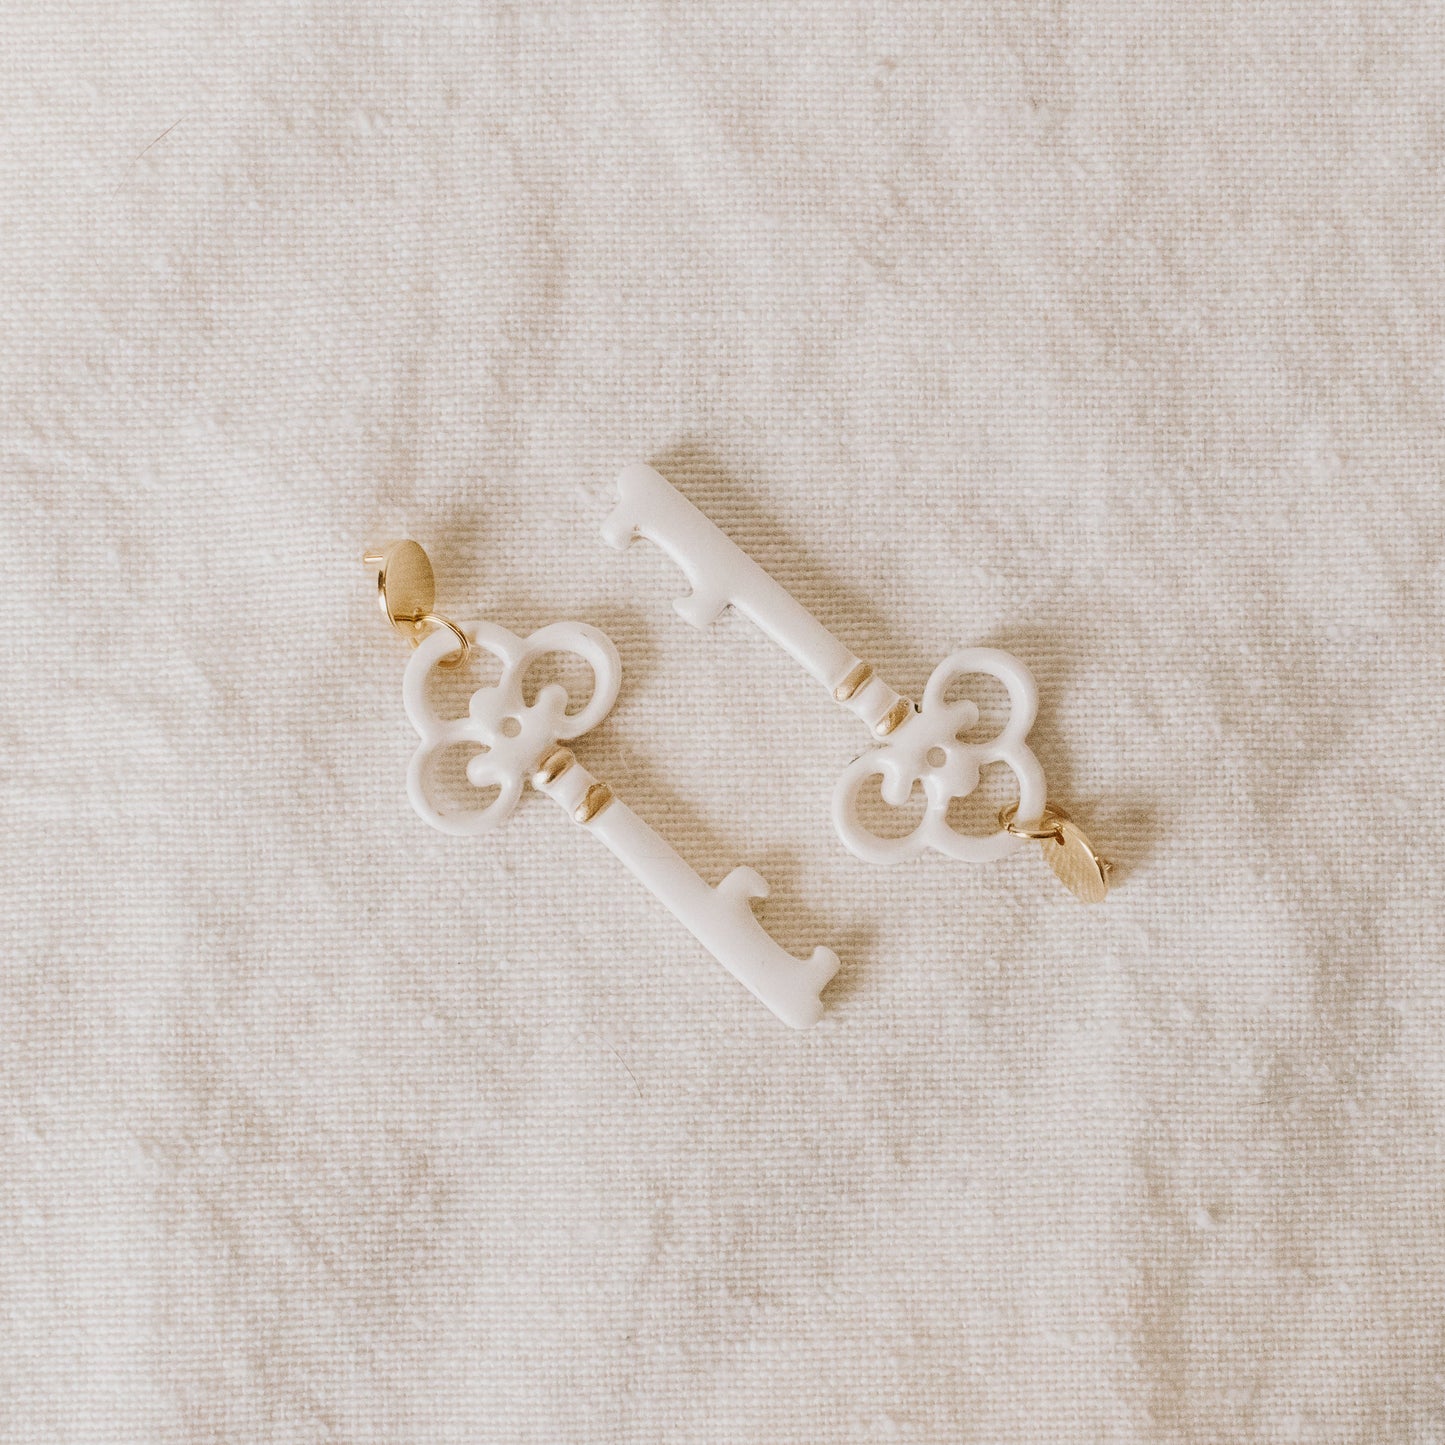 White and Gold Christmas Key Earrings - Claymore NZ - Earrings